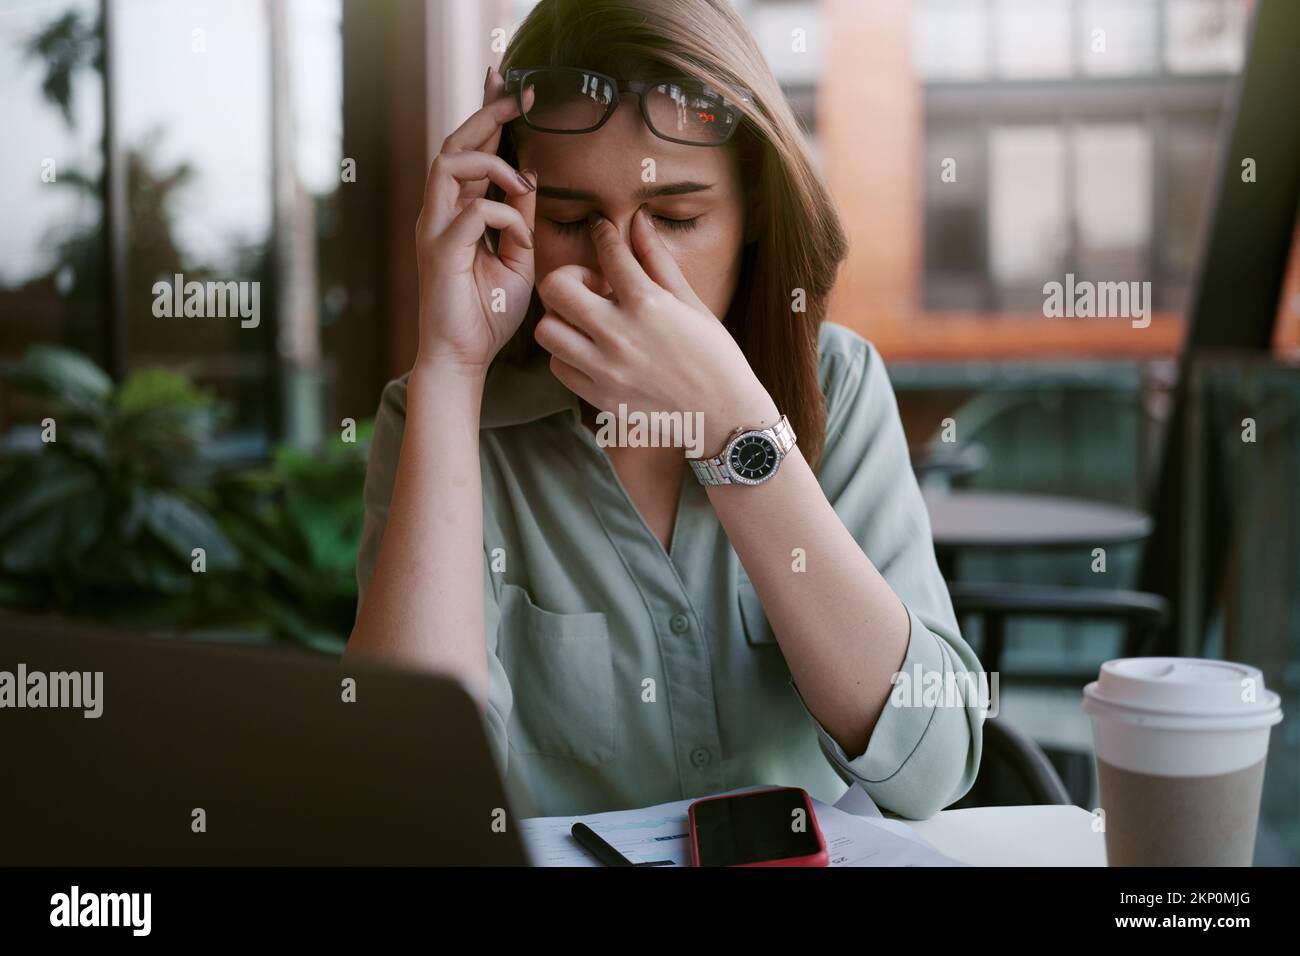 A tired and stressed young woman holds glasses and massages his nose while working hard in a cafe. Stock Photo